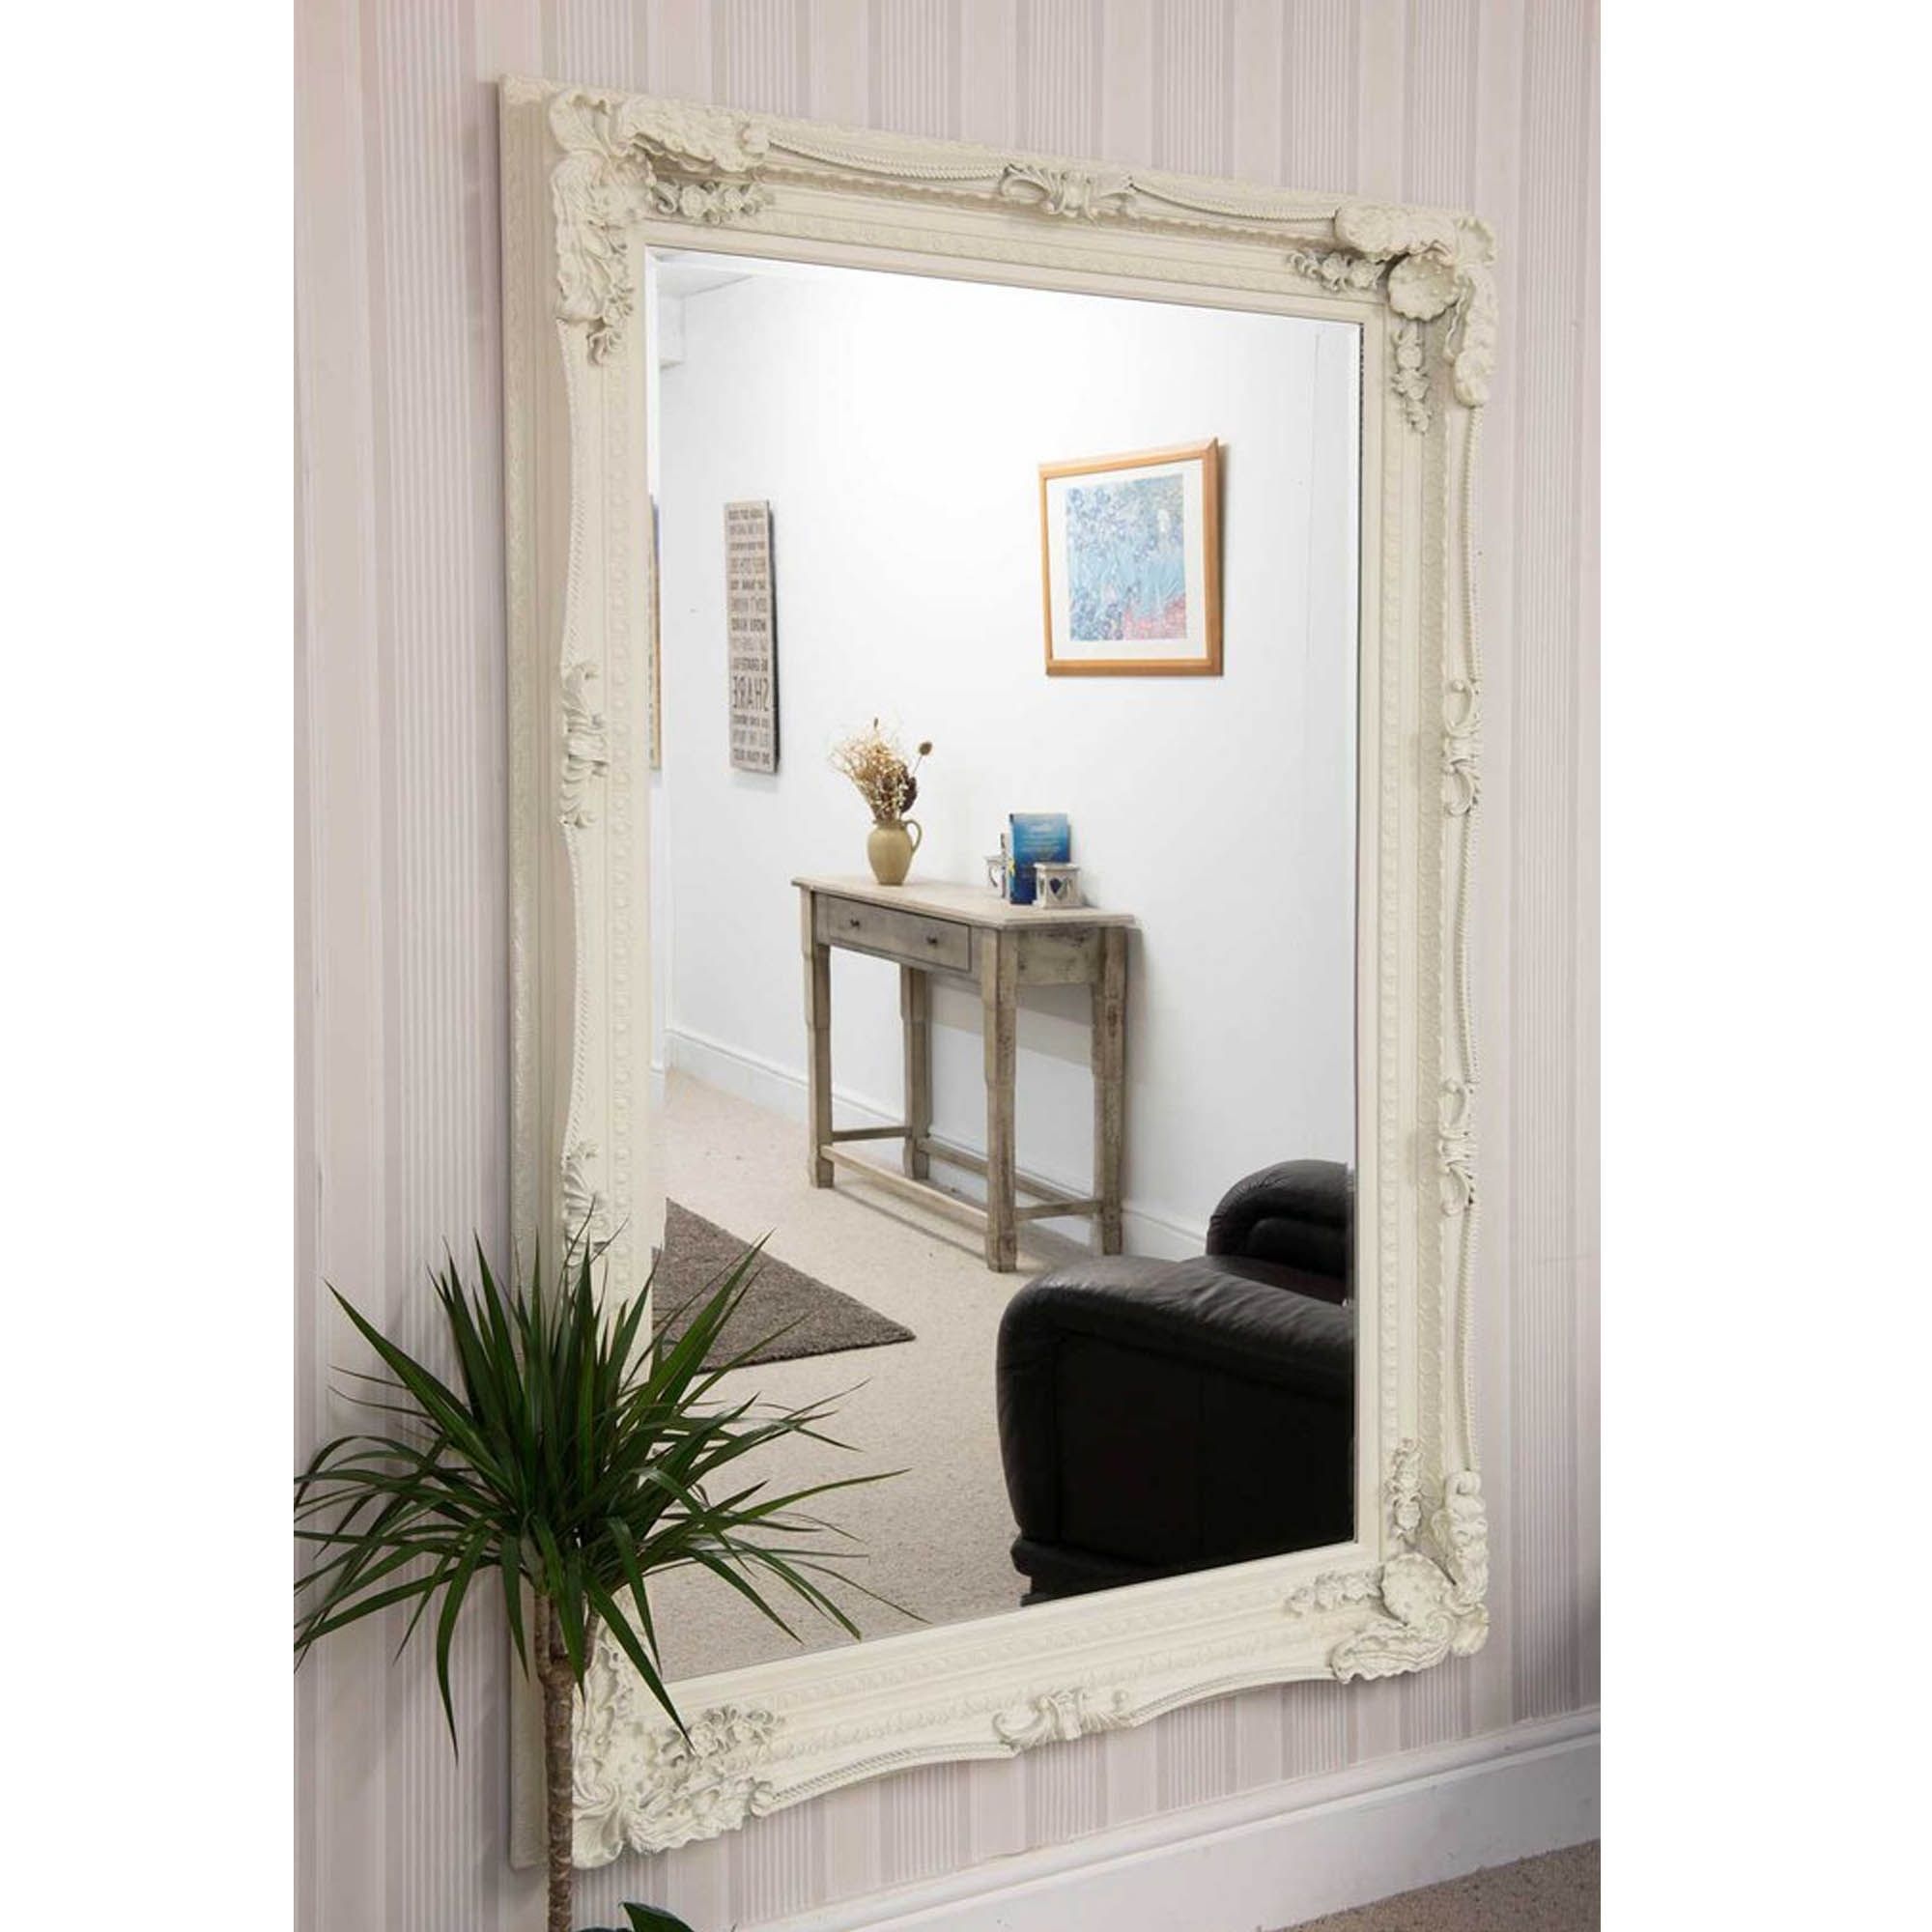 Carved Louis Antique French Style White Wall Mirror | Hd365 With White Wall Mirrors (Photo 11 of 15)